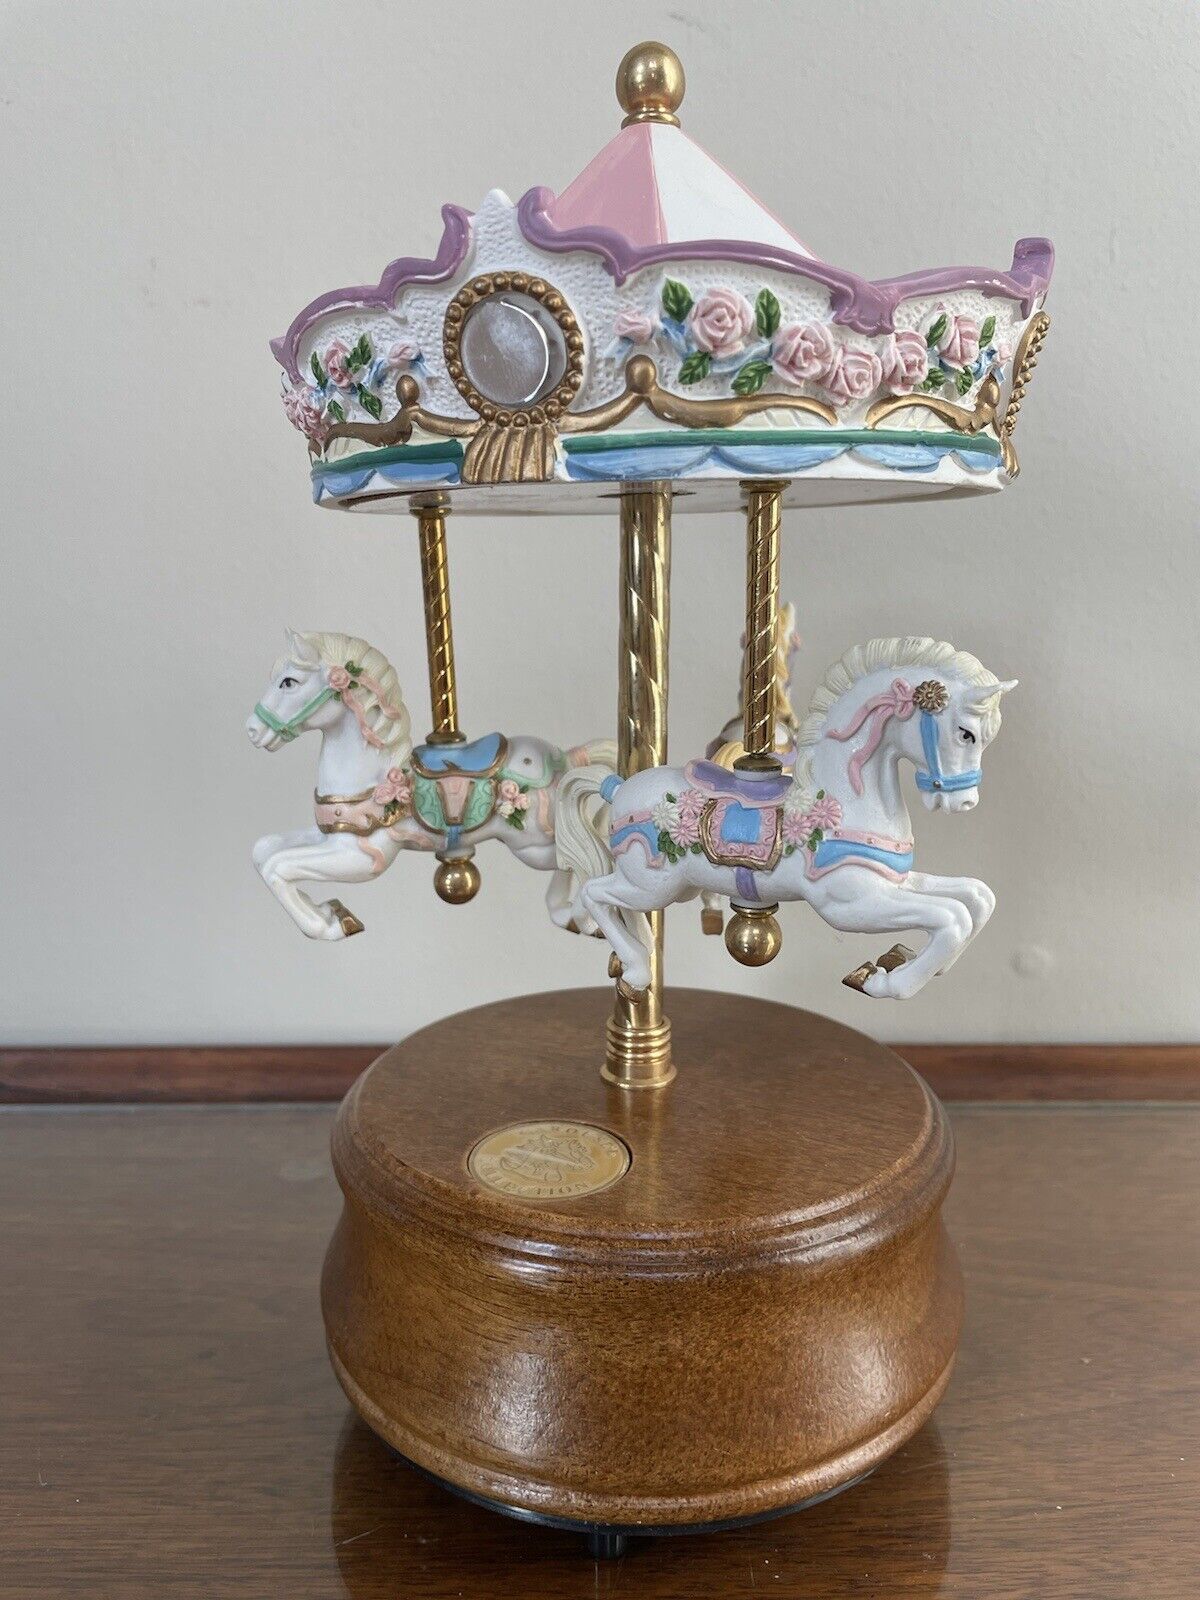 Vintage Carousel Collection 10” Merry Go Round Music Box Tested And Works Great